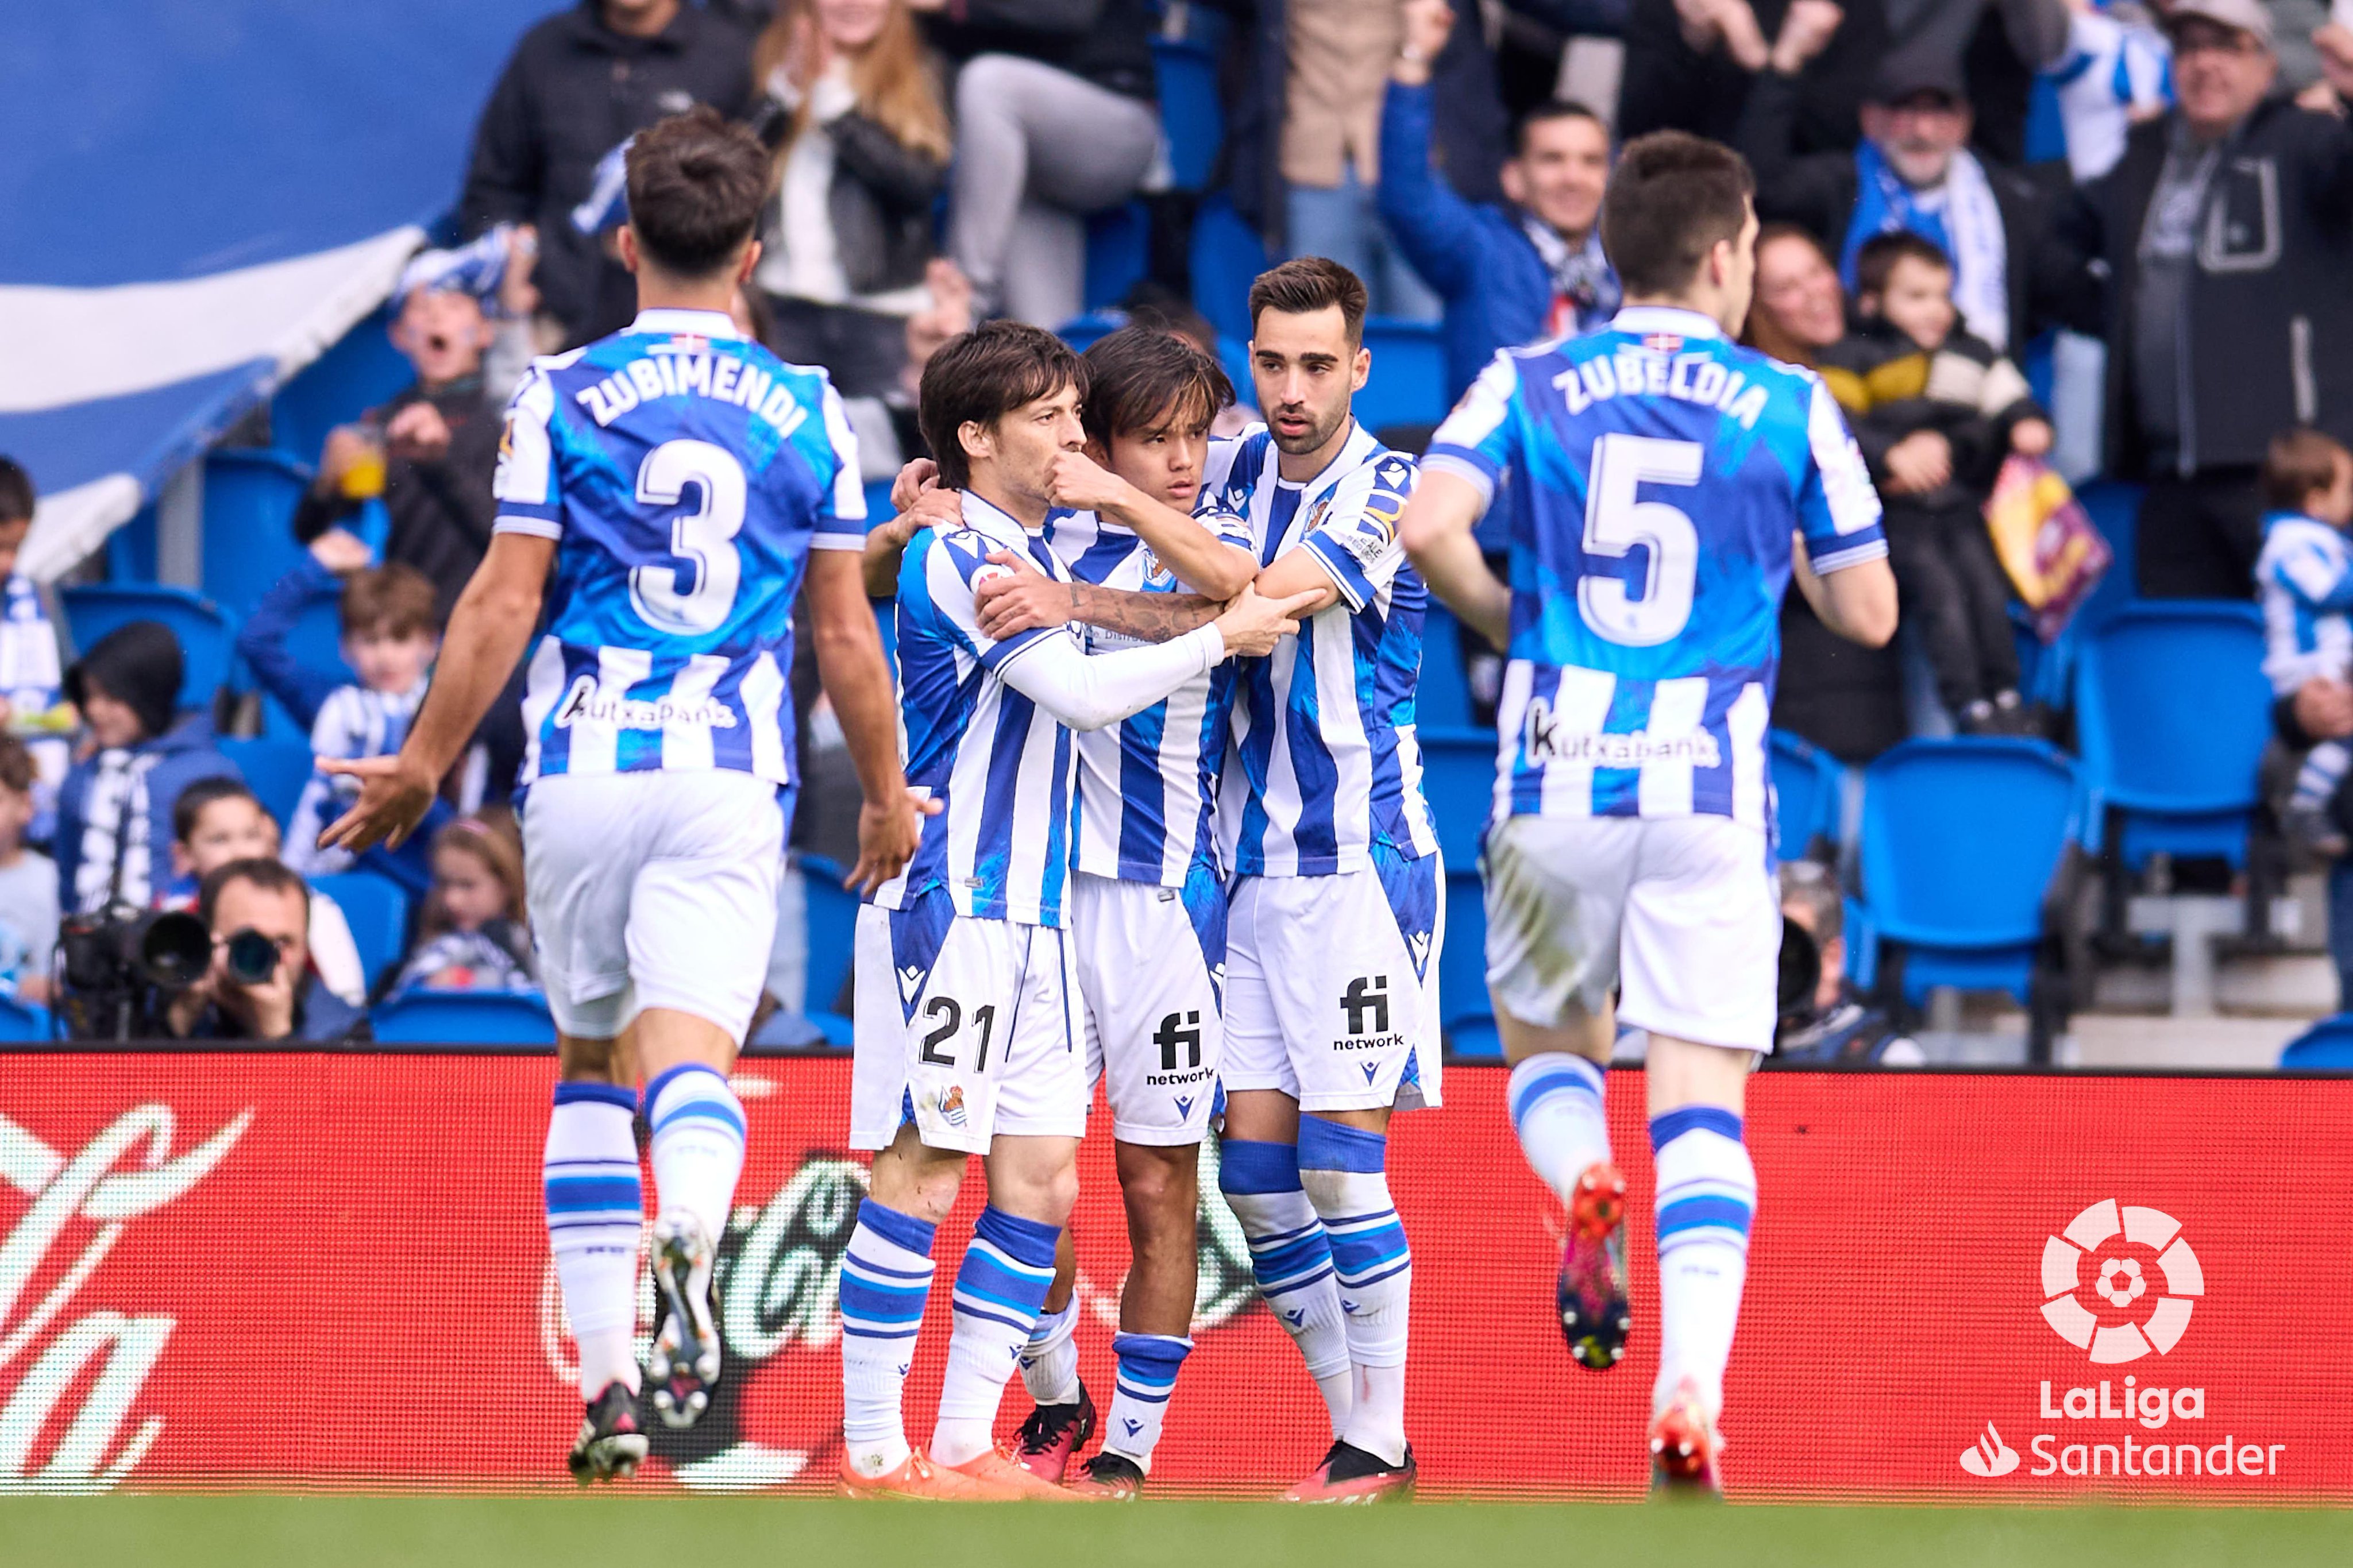 Real Sociedad and Athletic Club receive fitness boosts ahead of Basque derby